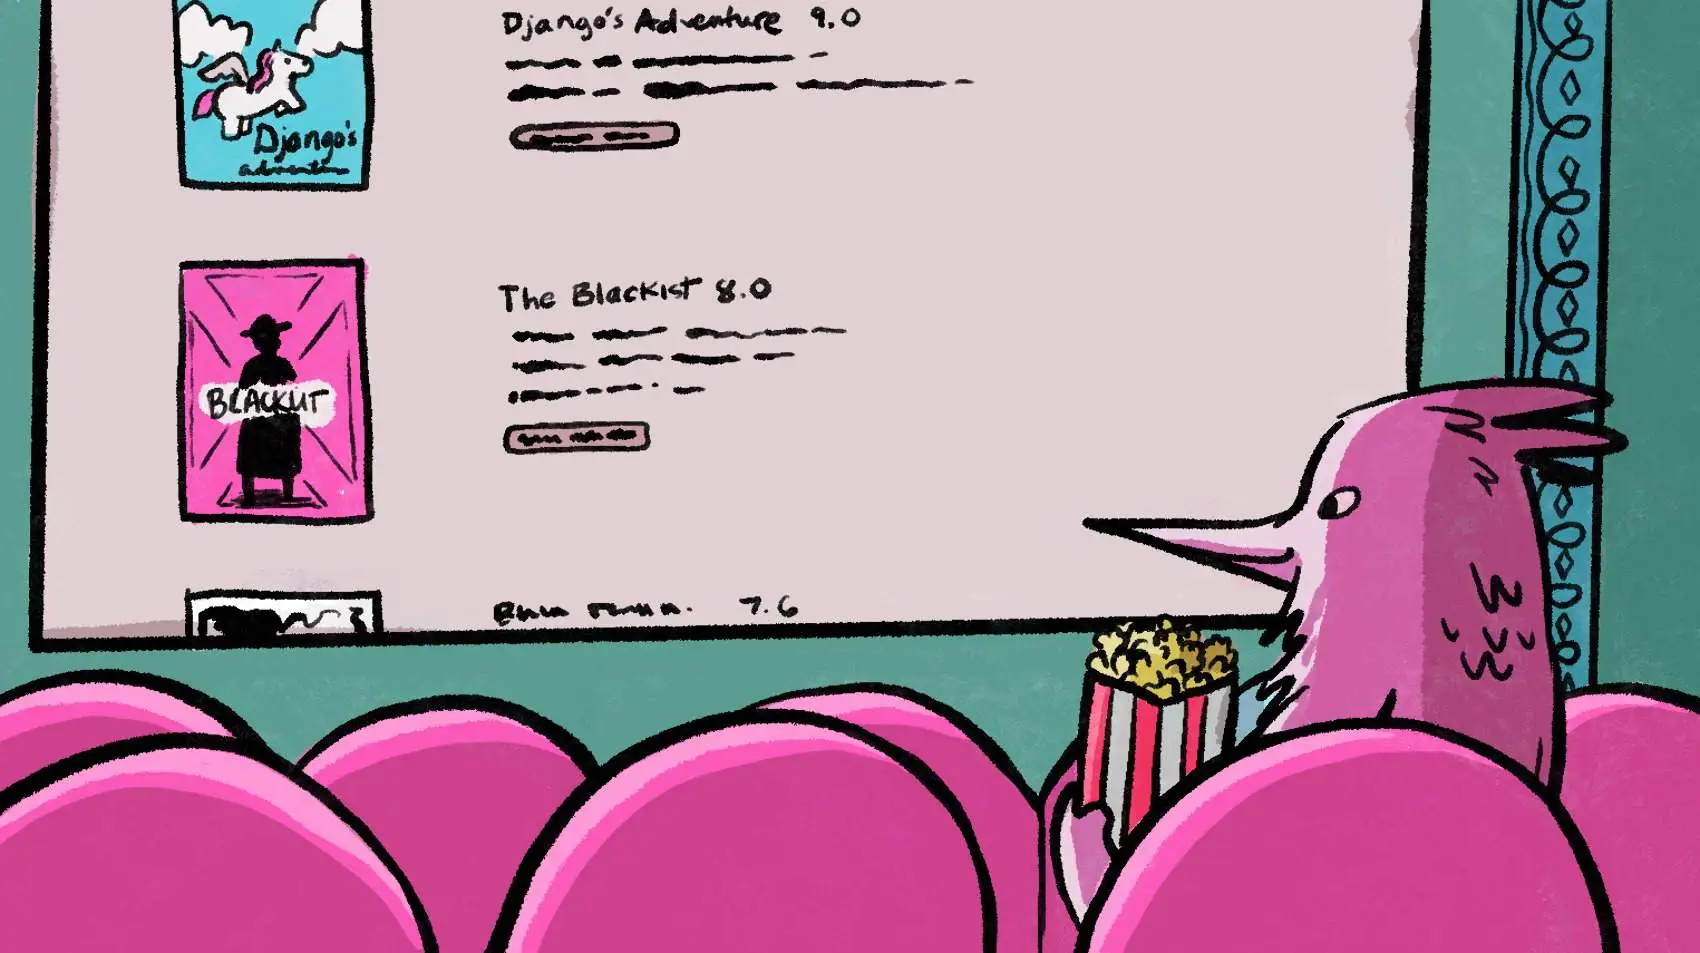 A pink bird holding a popcorn bucket at the cinema looking at the screen with a list of movies. The first movie on the list is the 'Django's Adventure'.